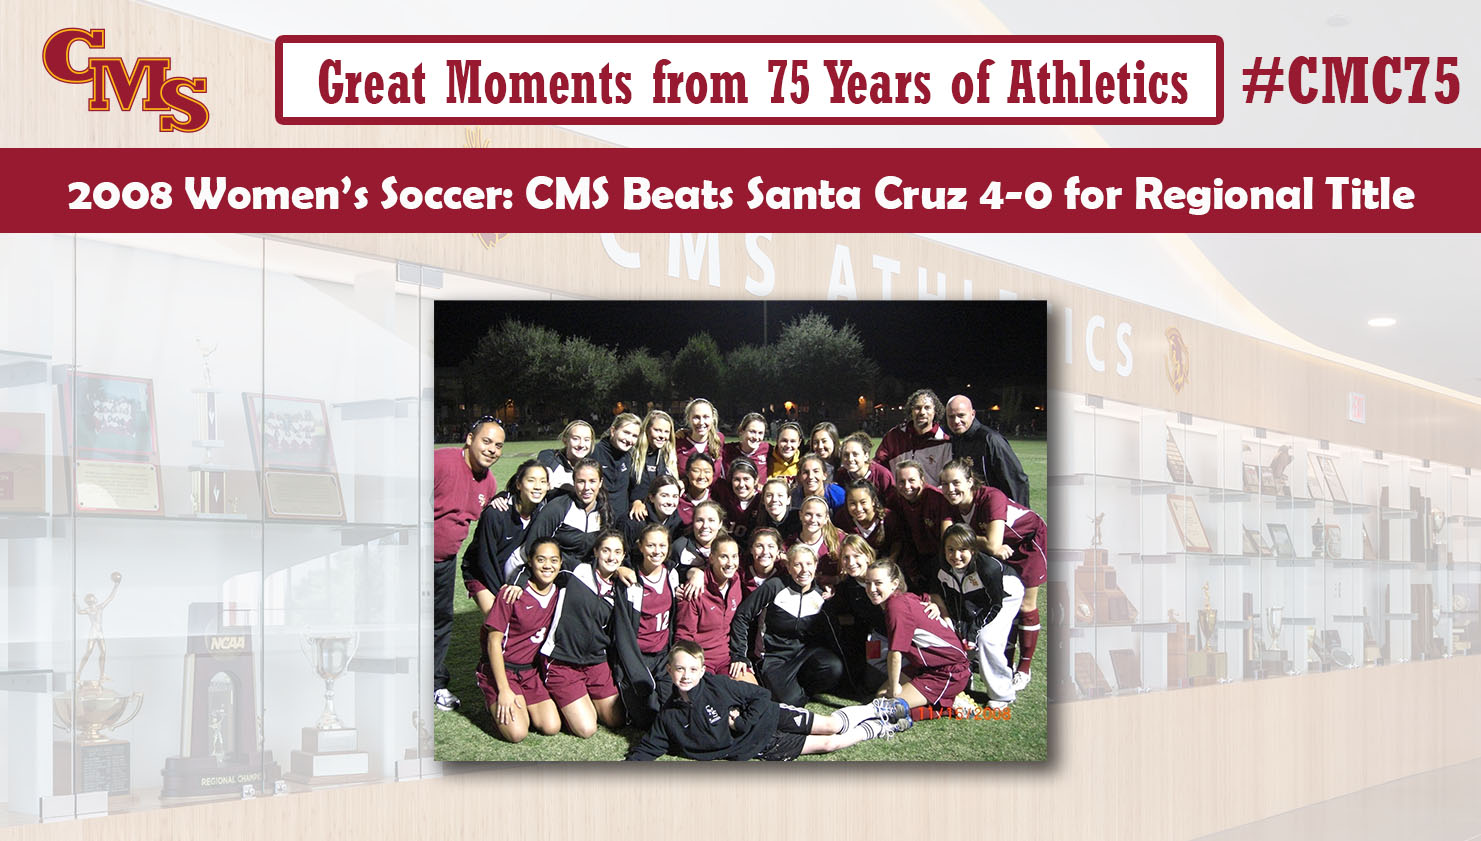 A photo of the team celebrating after the regional win. Words over the photo read: Great Moments from 75 Years of Athletics, 2008 Women's Soccer: CMS Beats Santa Cruz for Regional Title